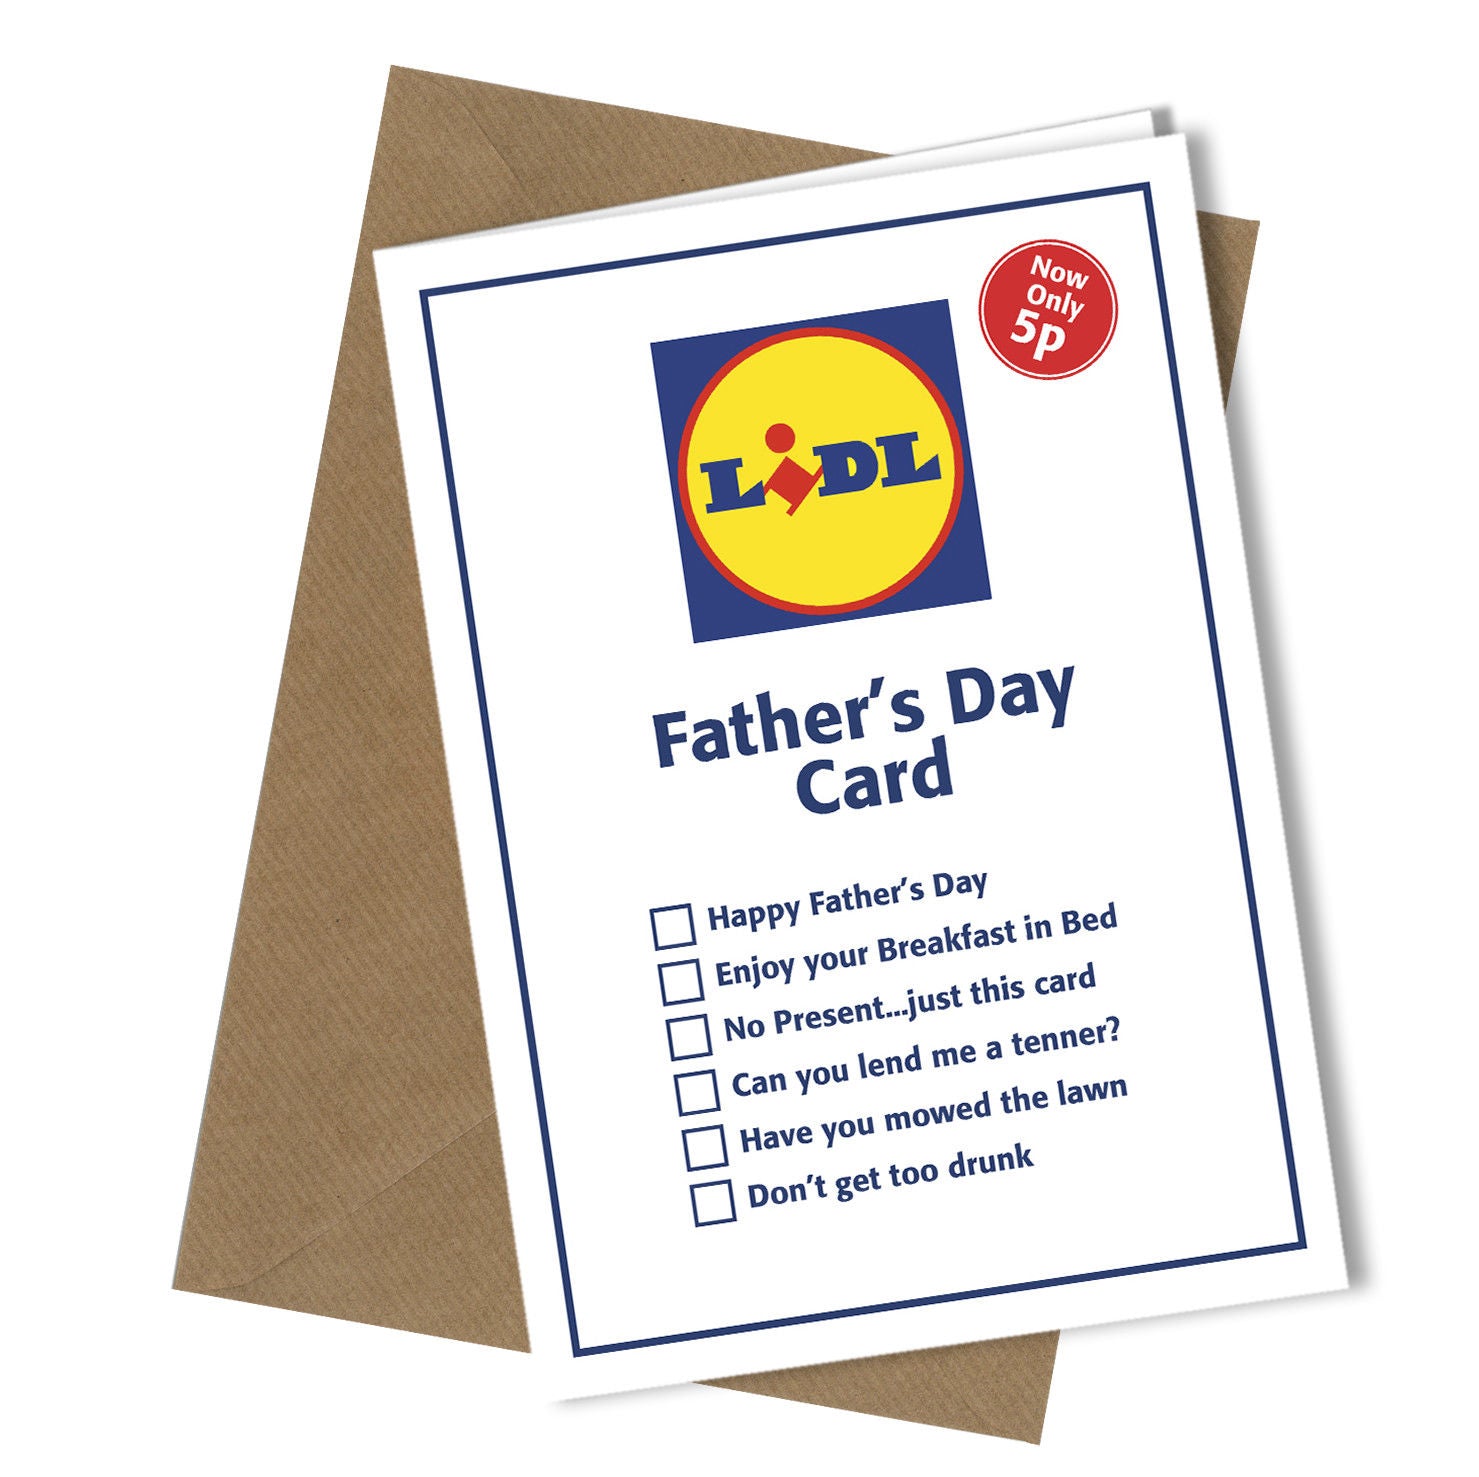 #248 Lidl Father's